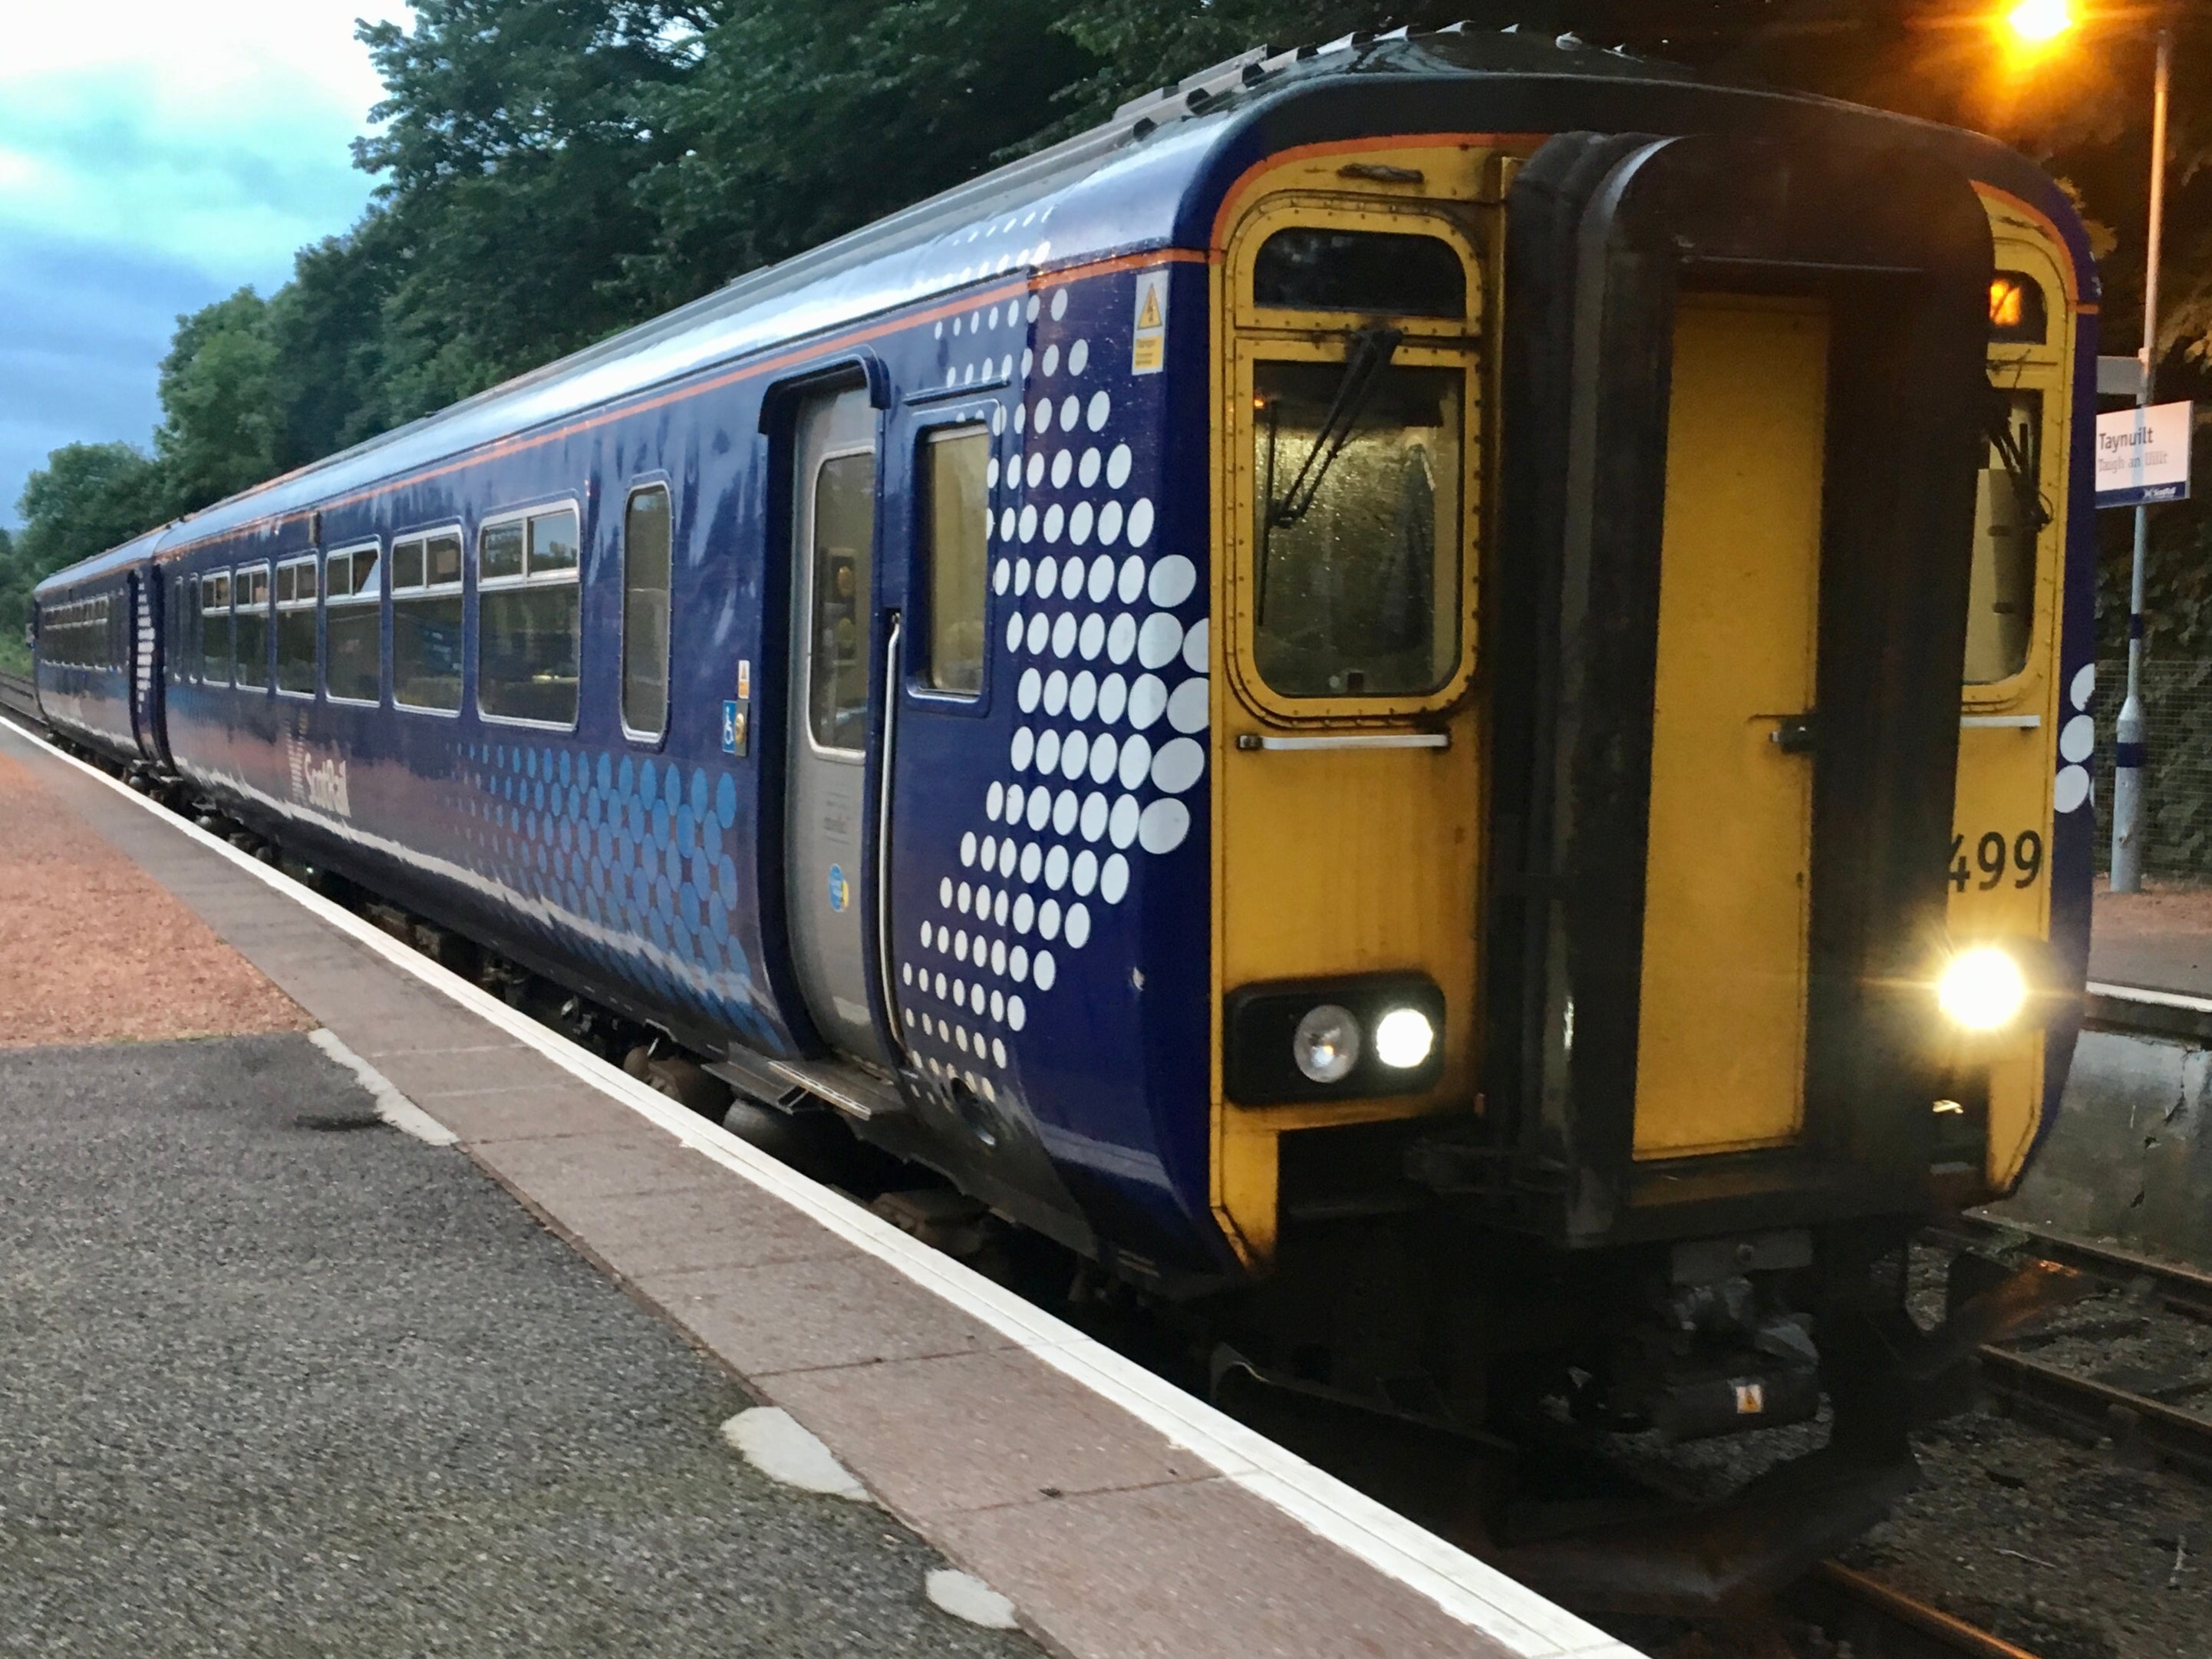 Departing soon: a ScotRail train in the West Highlands